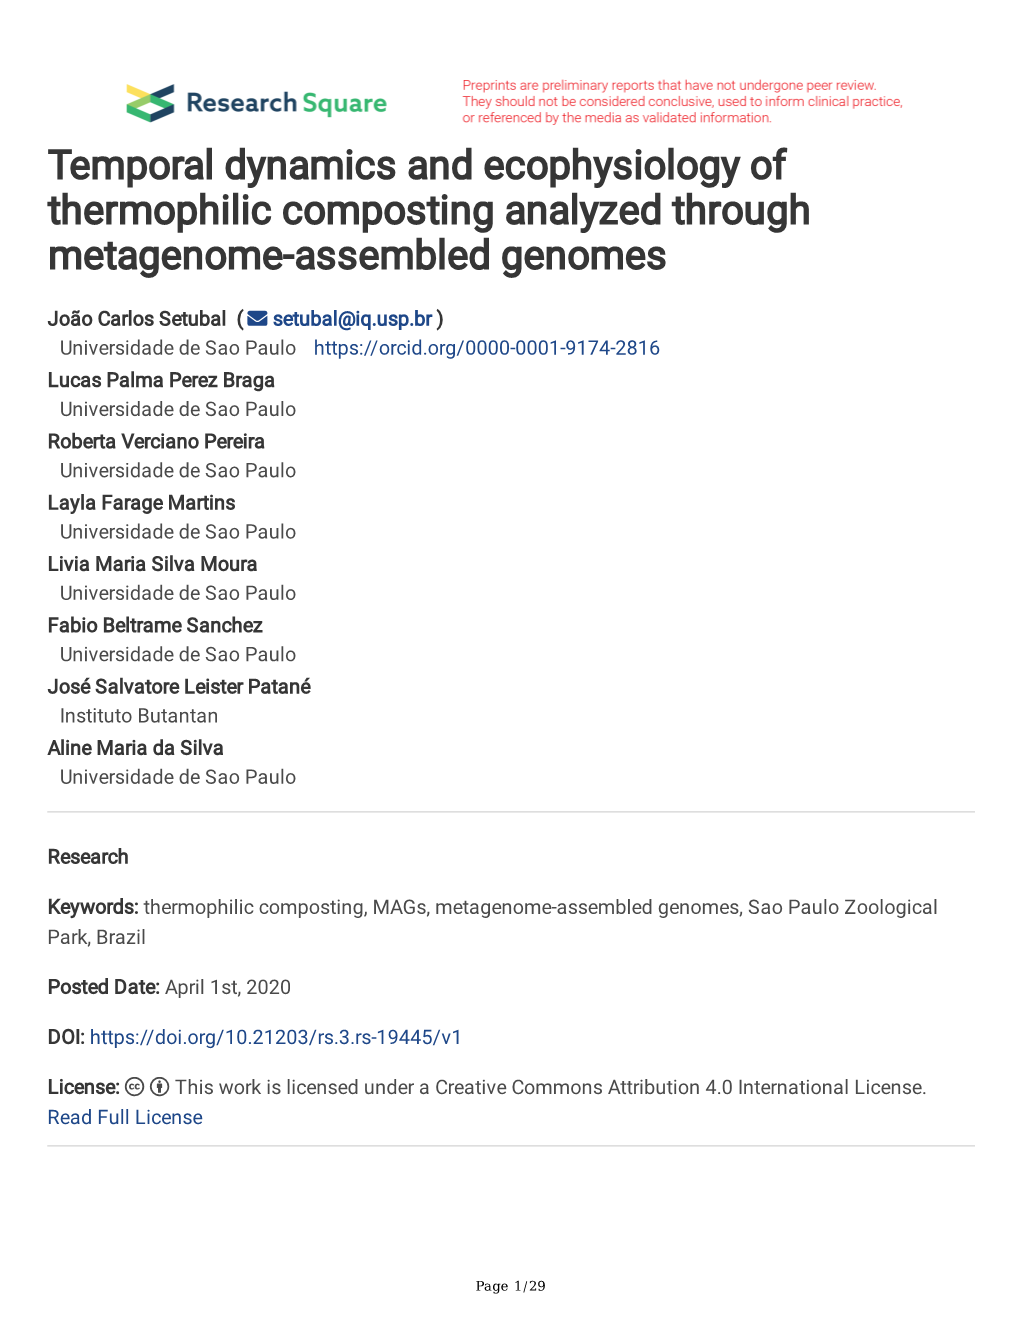 Temporal Dynamics and Ecophysiology of Thermophilic Composting Analyzed Through Metagenome-Assembled Genomes